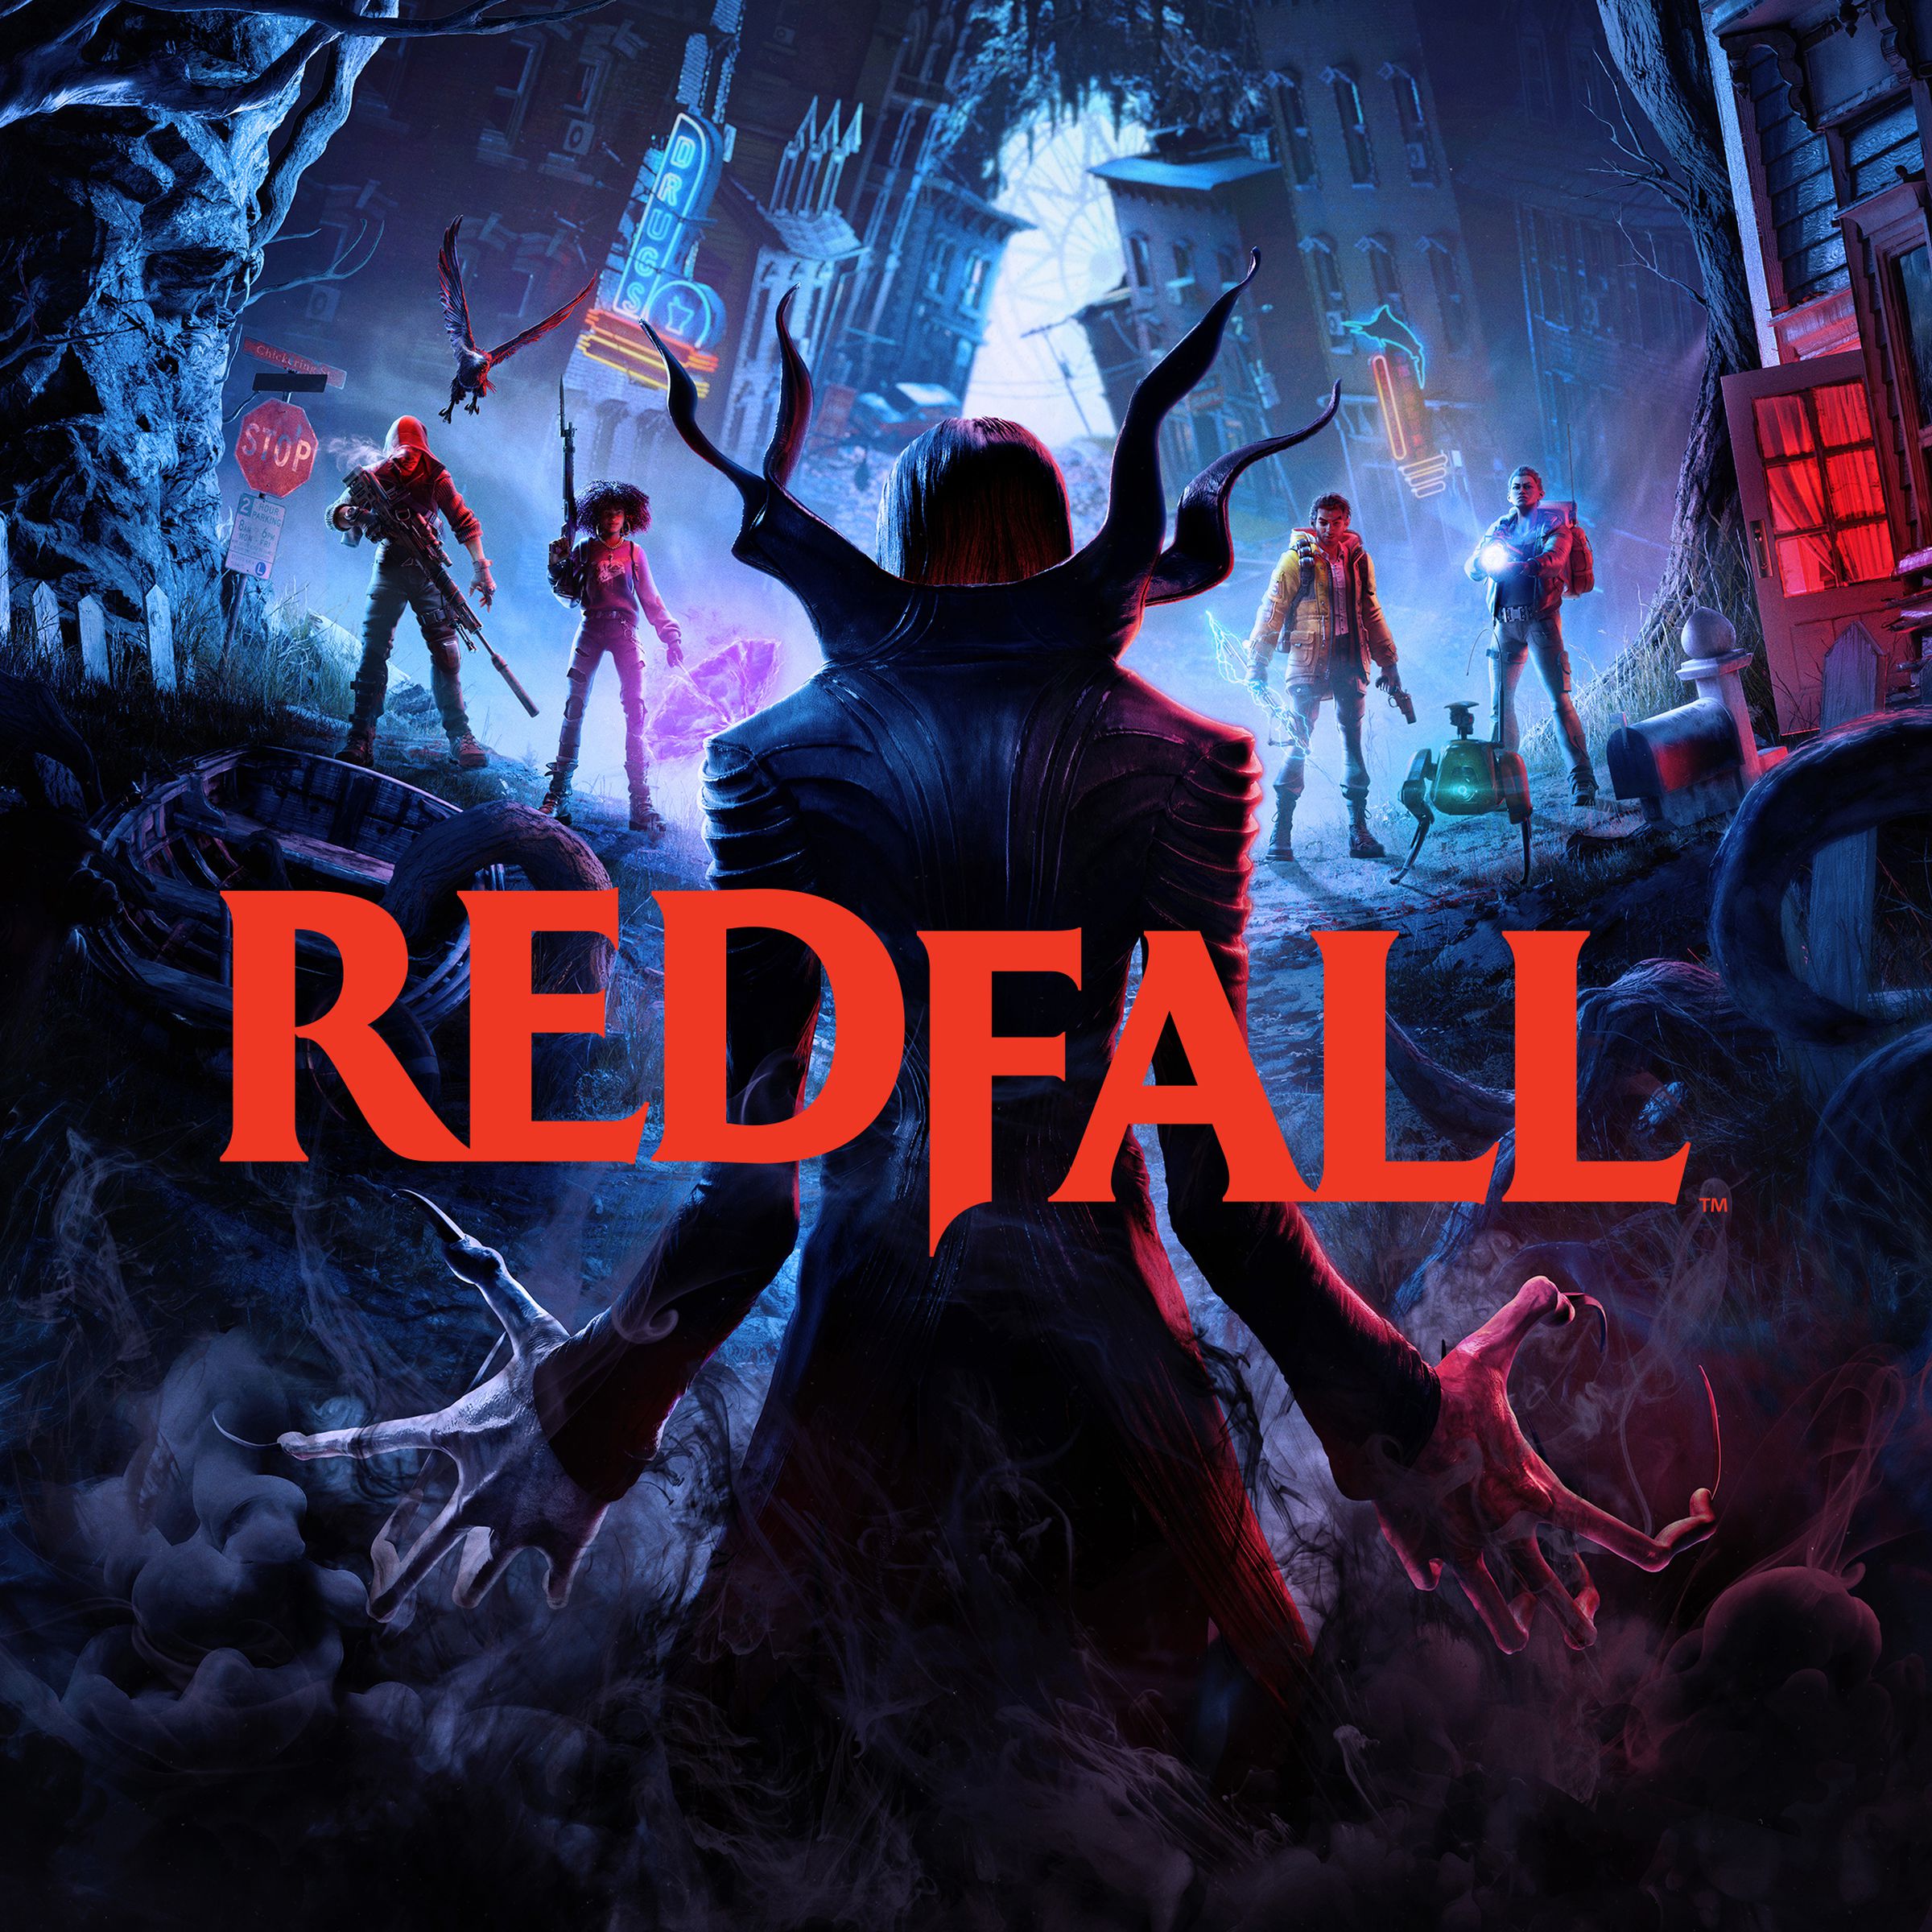 An image from the Redfall video game from Bethesda